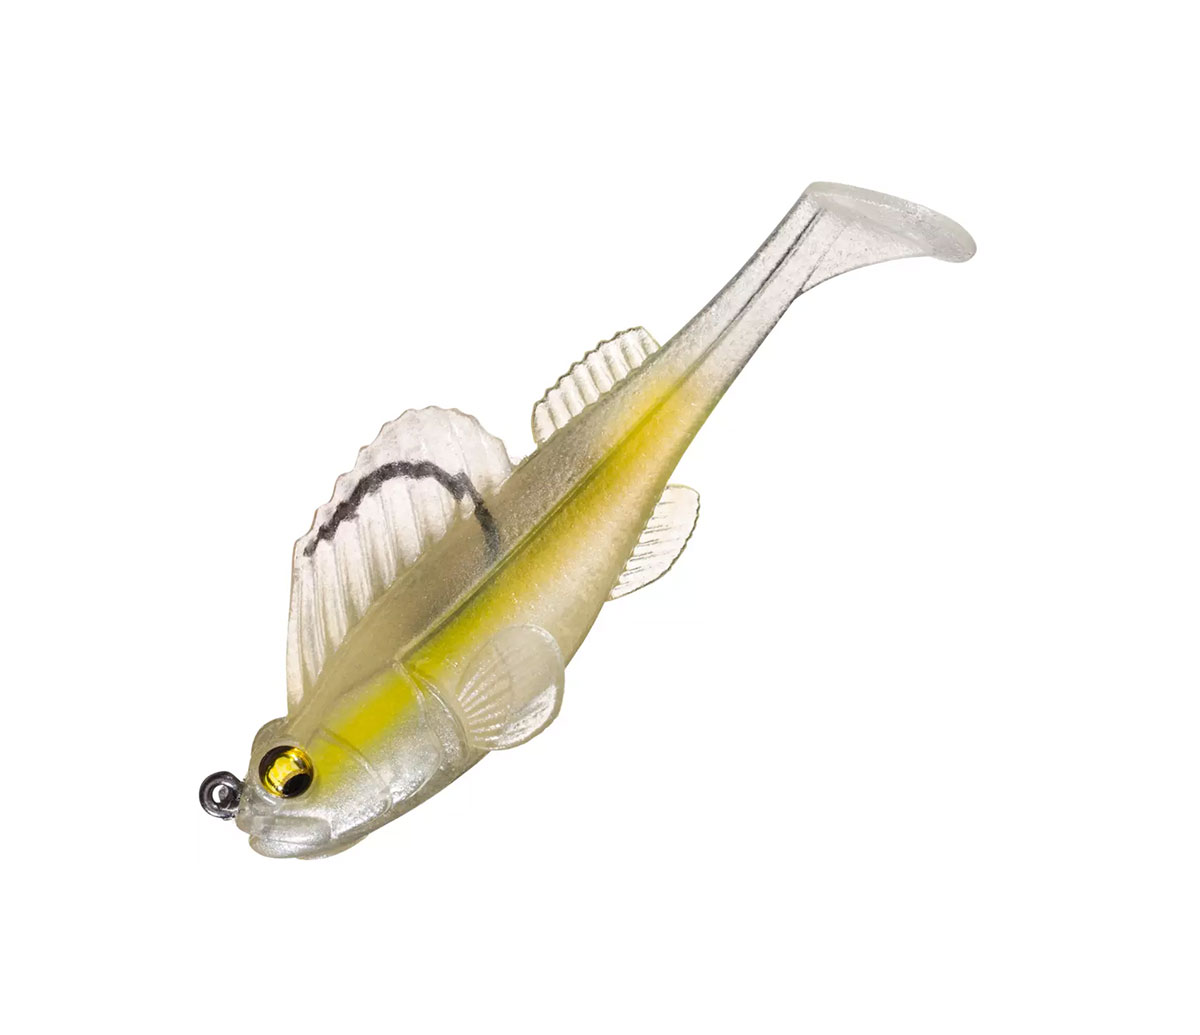 10 Weird Lures You Should Try